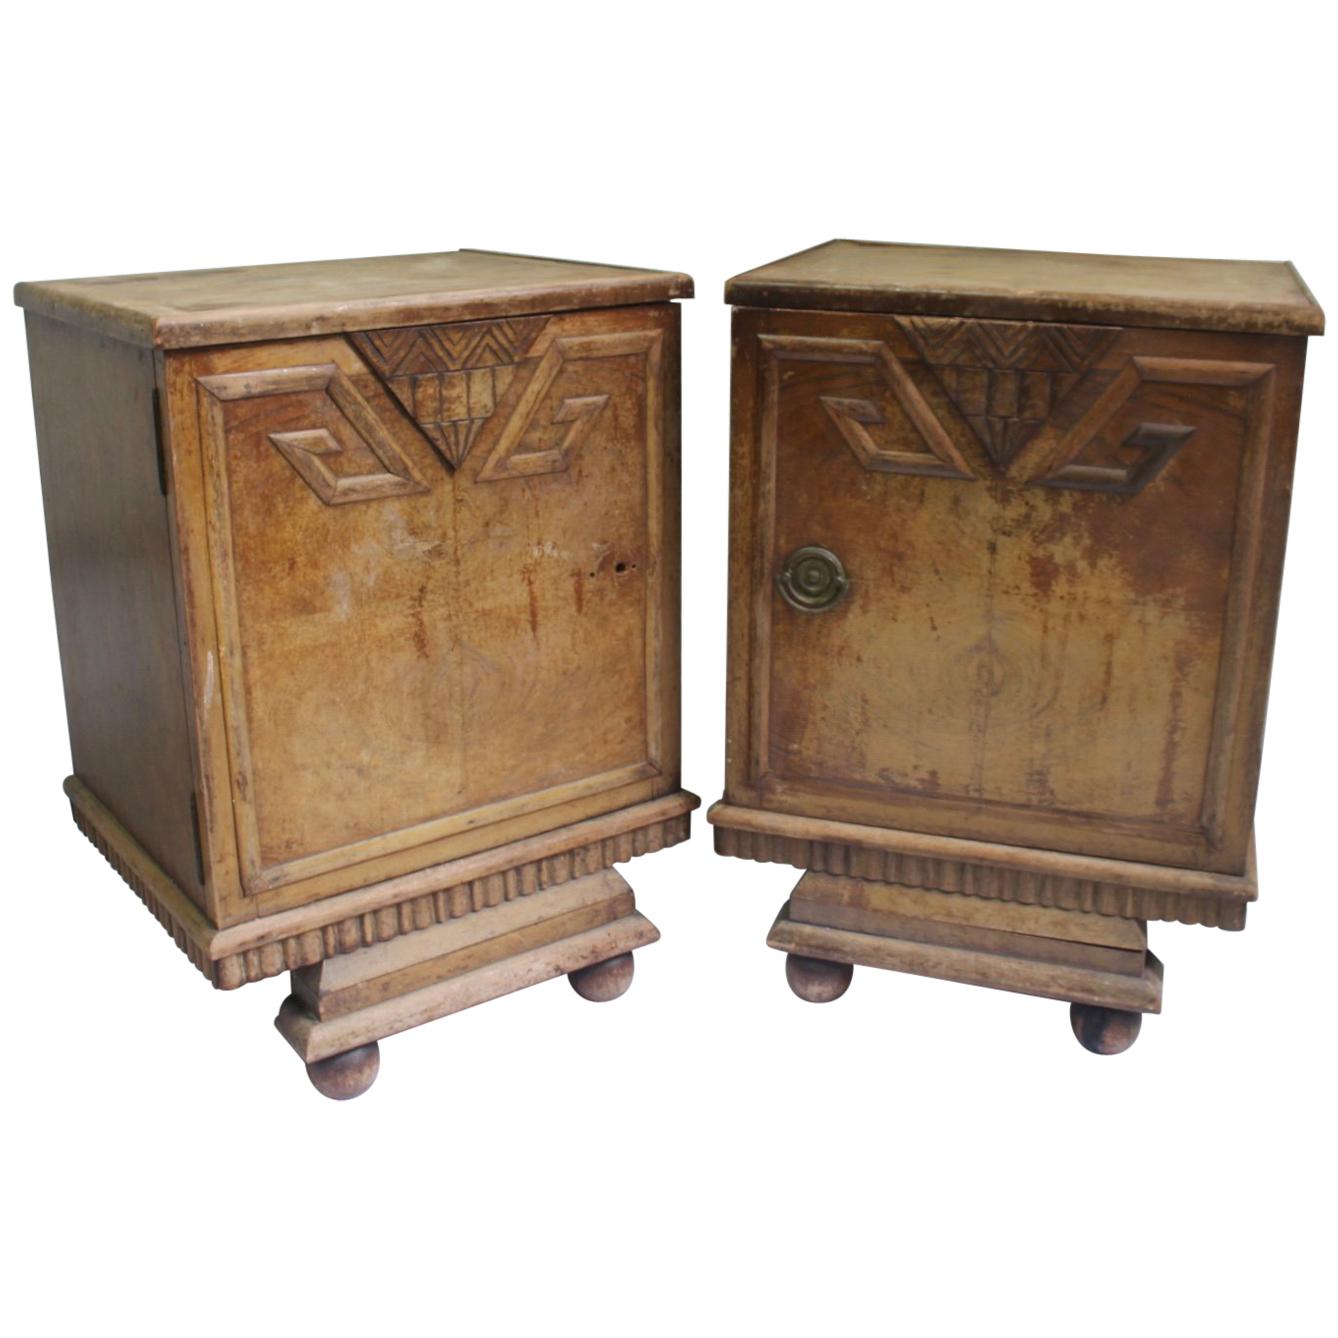 Unique Set of 2 Geometric Art Deco Spanish Nightstands or Side Tables, 1920s